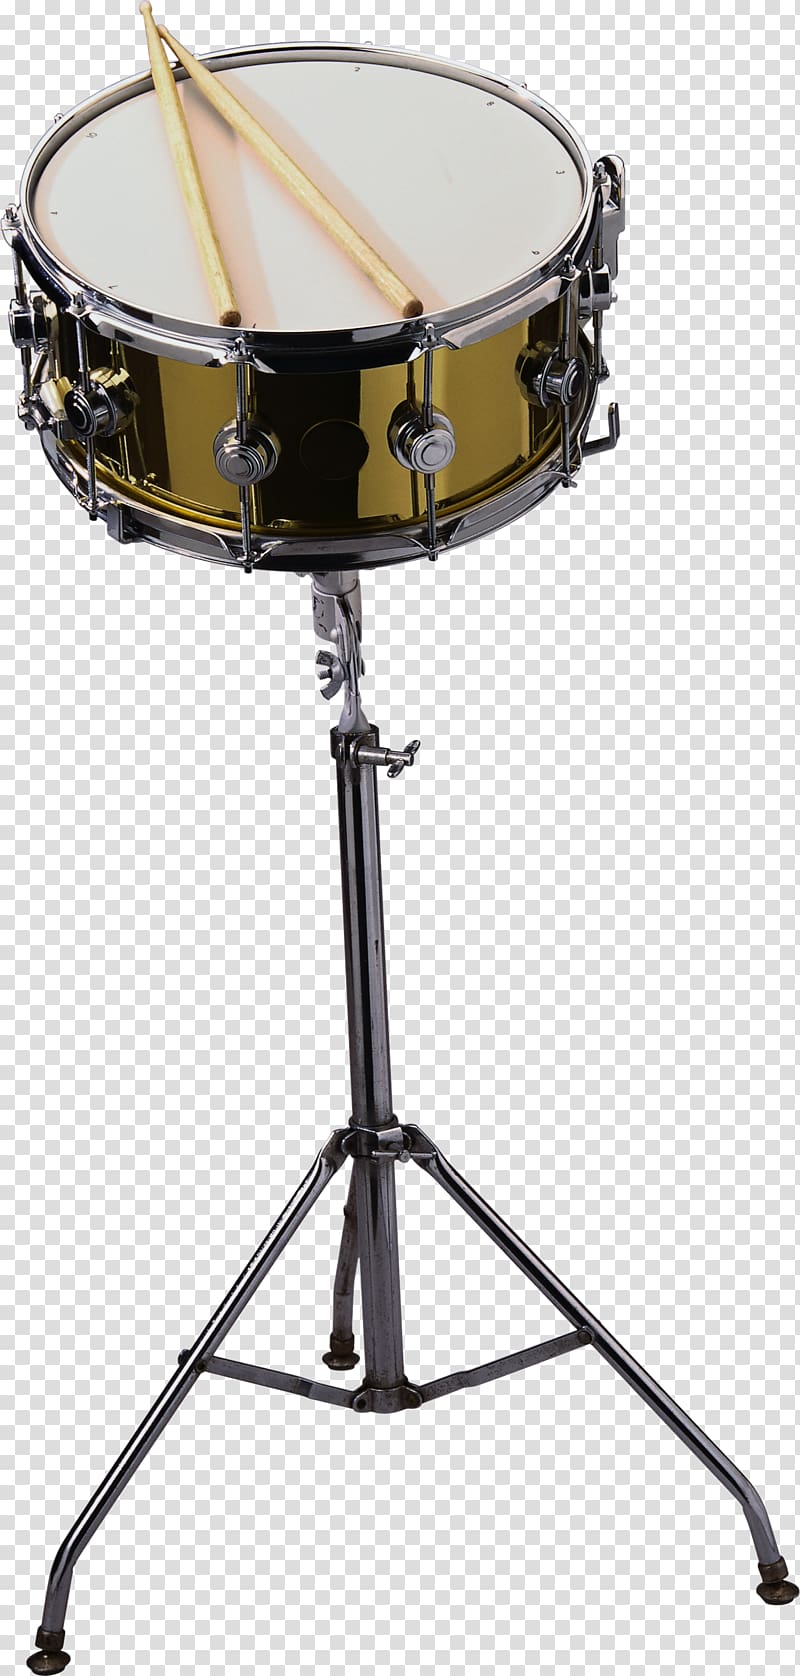 Tom-Toms Timbales Drum stick Snare Drums Marching percussion, Drum Stick transparent background PNG clipart